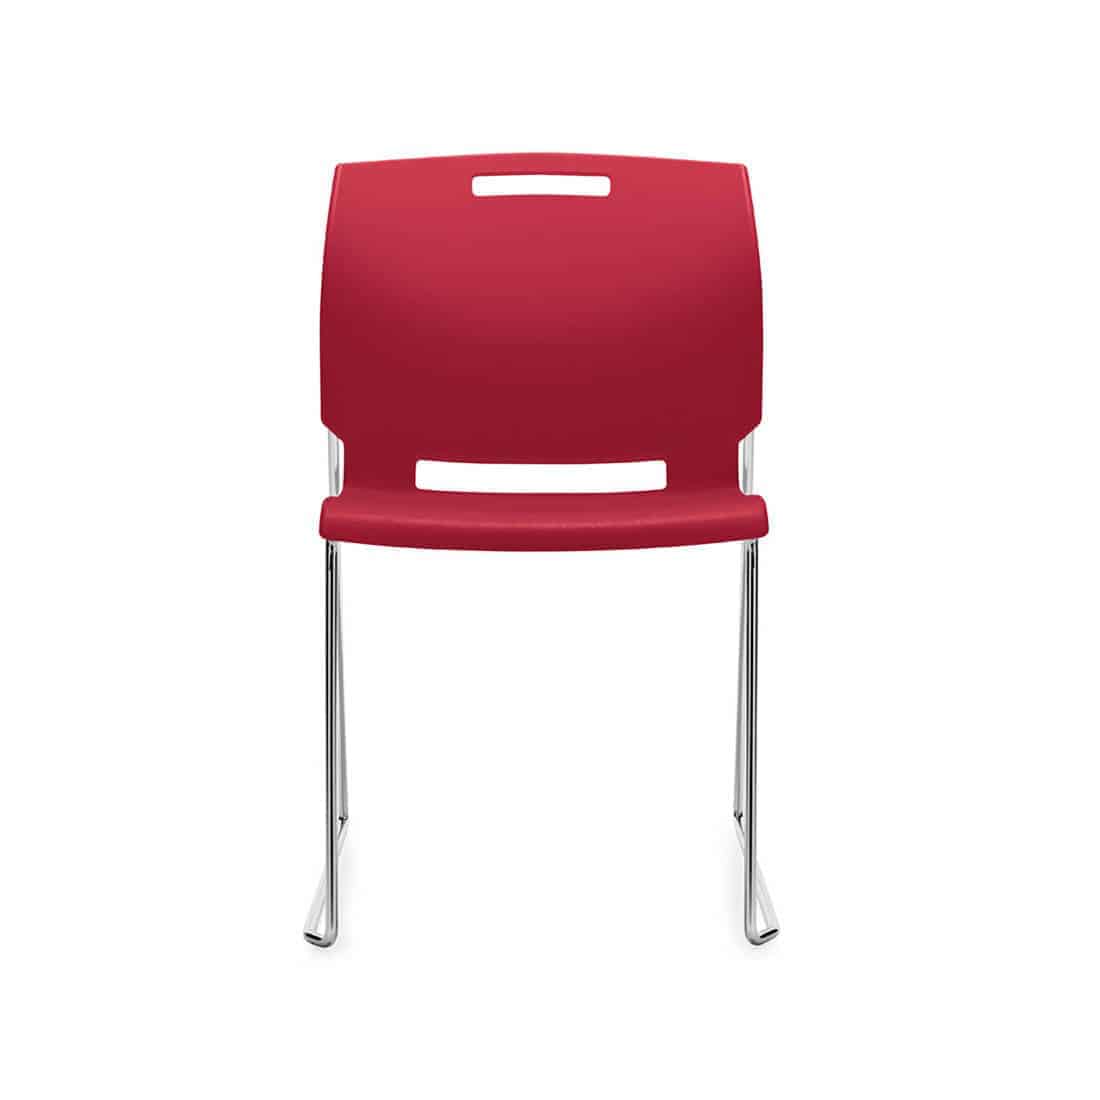 Office Cafeteria Furniture Break Room Lunch Room Chairs Joyce